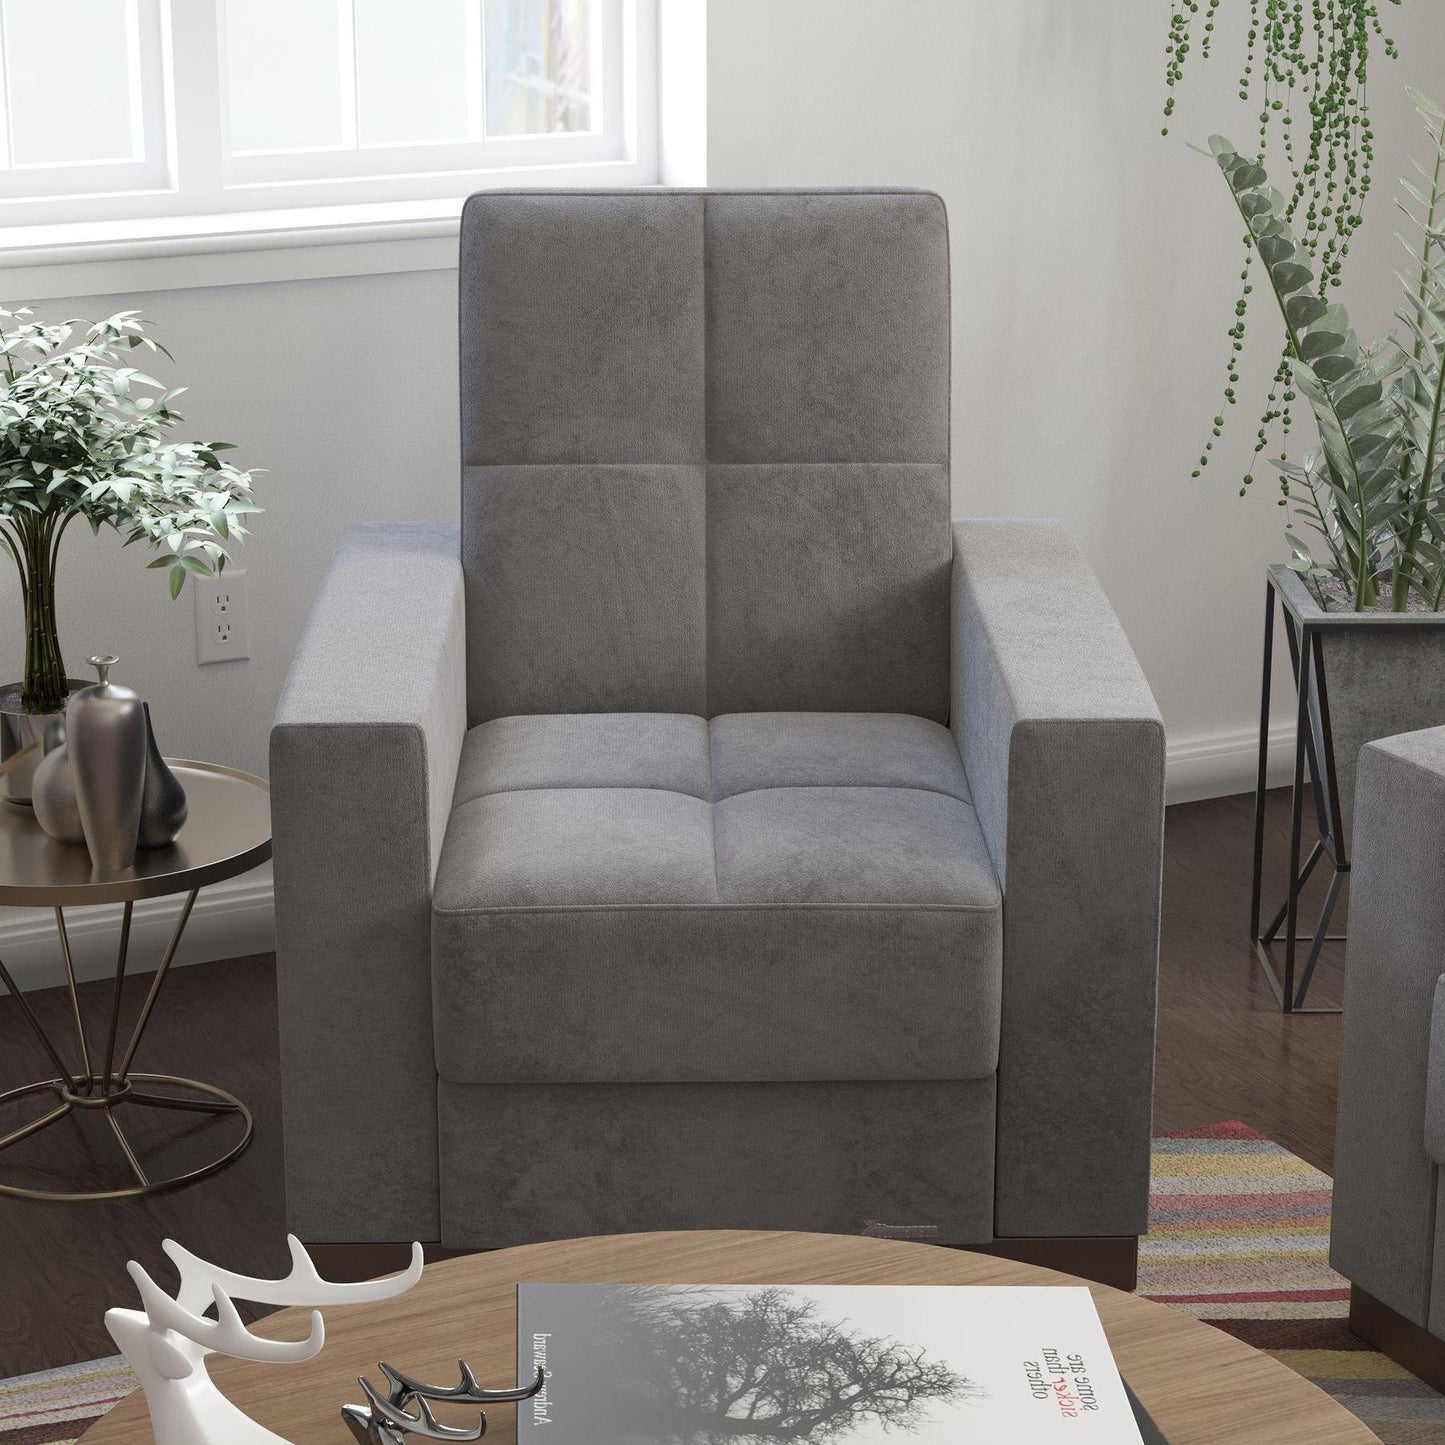 Modern design, Pewter Gray , Microfiber upholstered convertible Armchair with underseat storage from Voyage Track by Ottomanson in living room lifestyle setting by itself. This Armchair measures 38 inches width by 36 inches depth by 41 inches height.